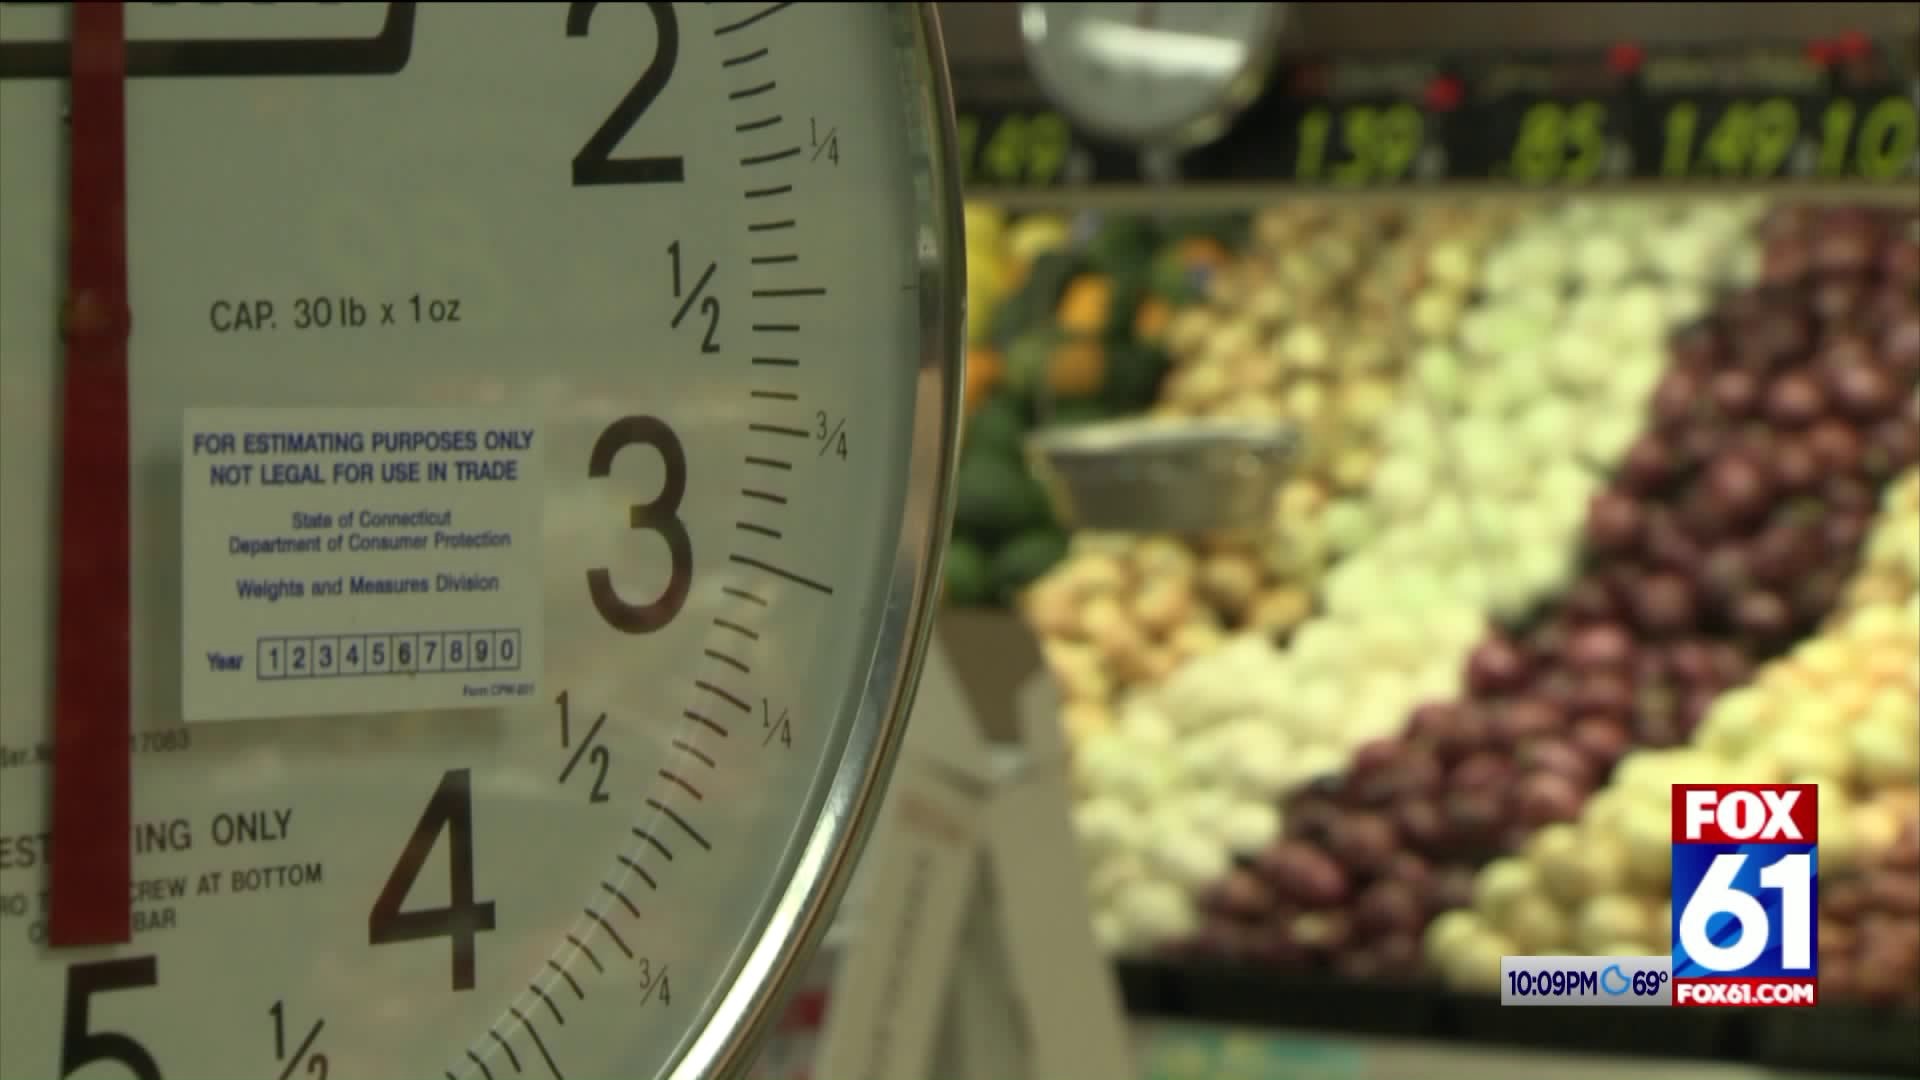 NEW PROPOSAL COULD CUT THOUSANDS FROM FOOD STAMPS